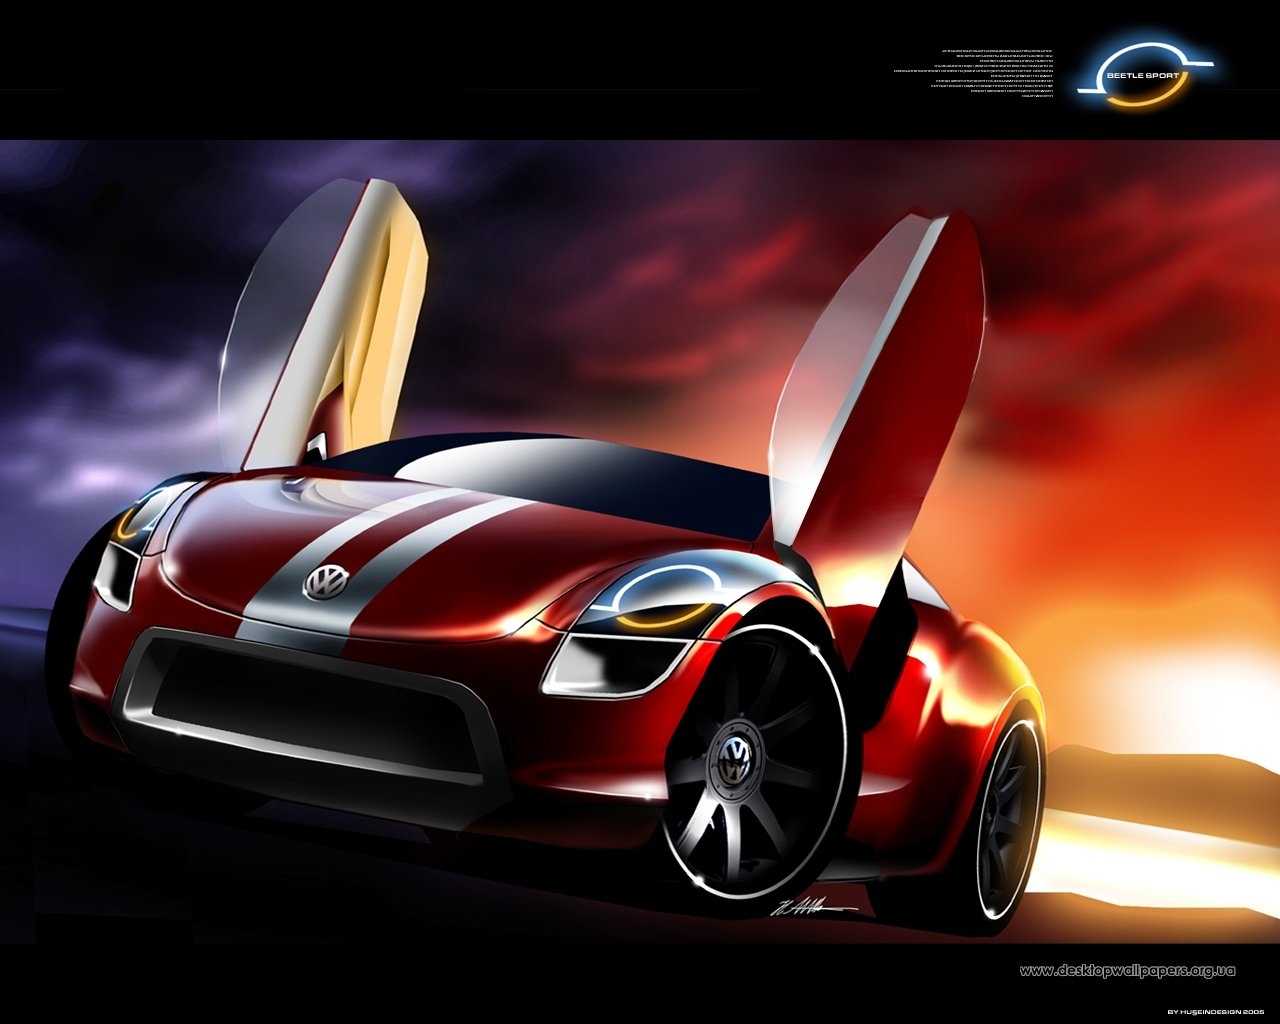 9206 download wallpaper transport, auto, art, volkswagen, black screensavers and pictures for free